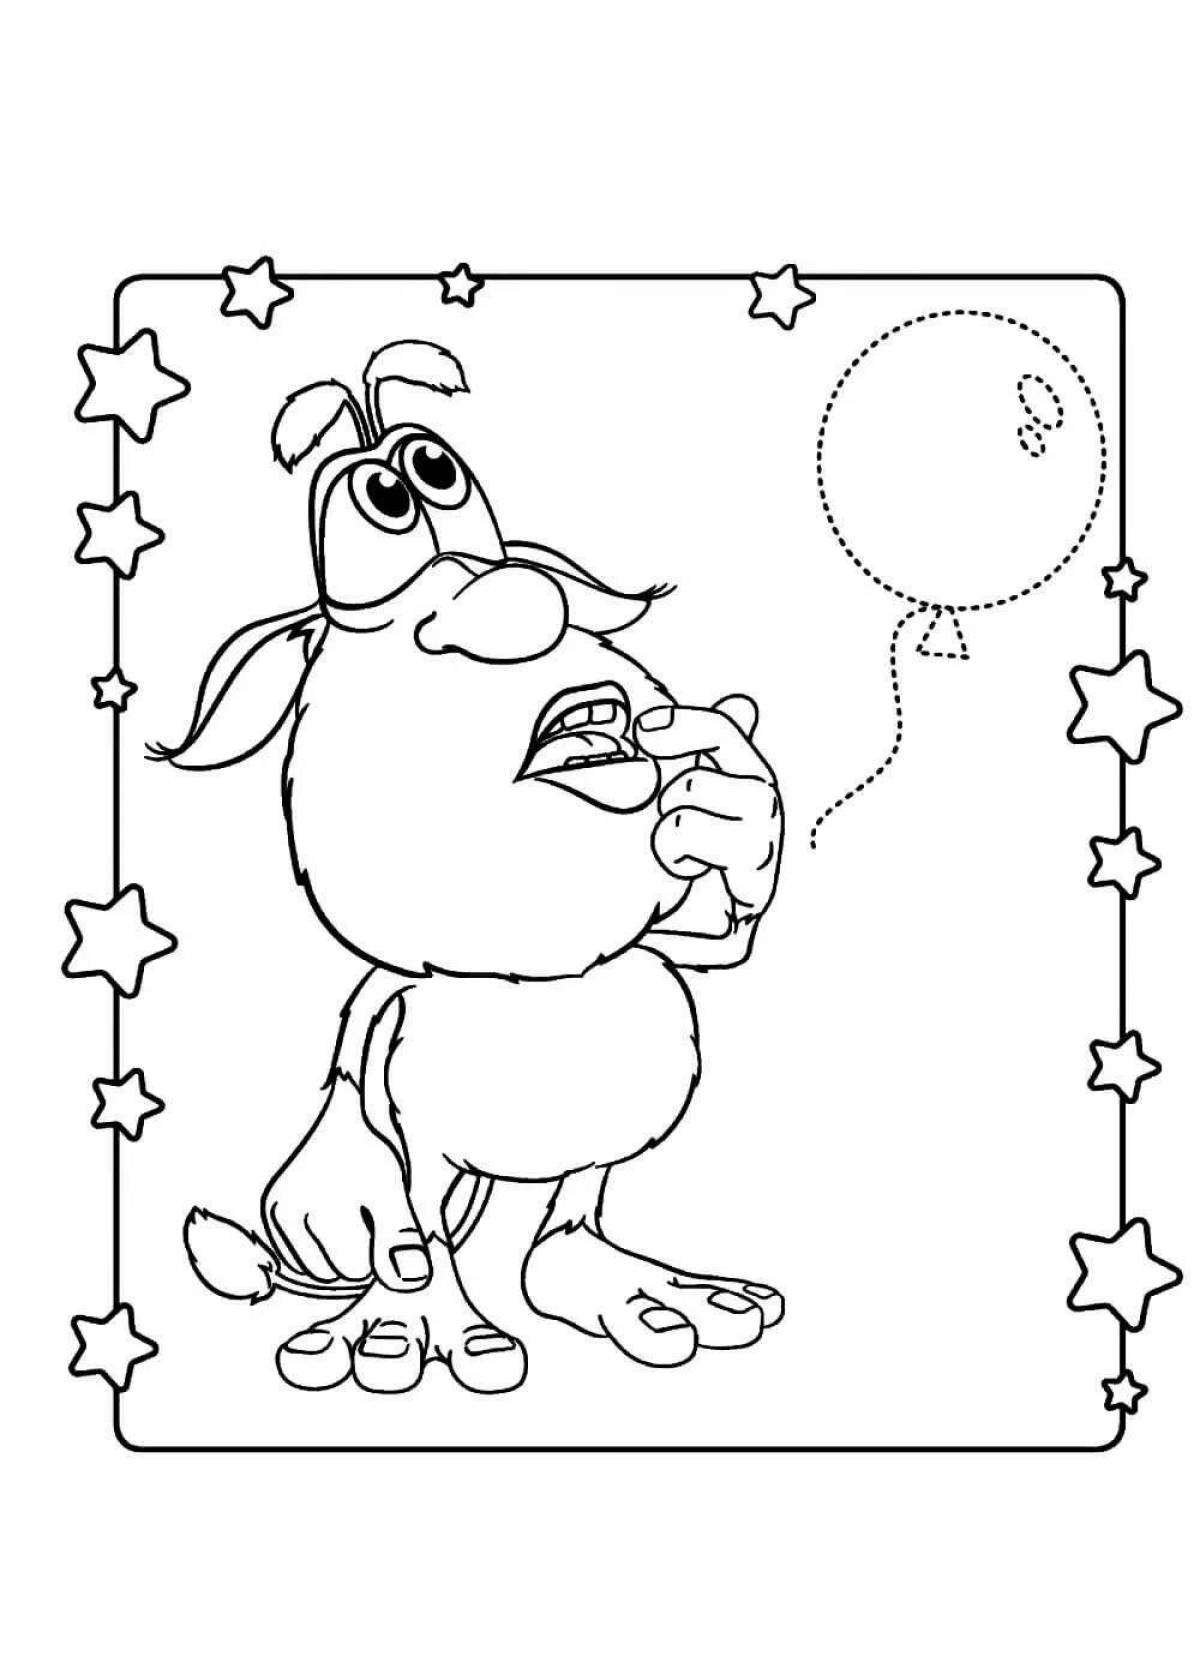 Great buba coloring book for kids